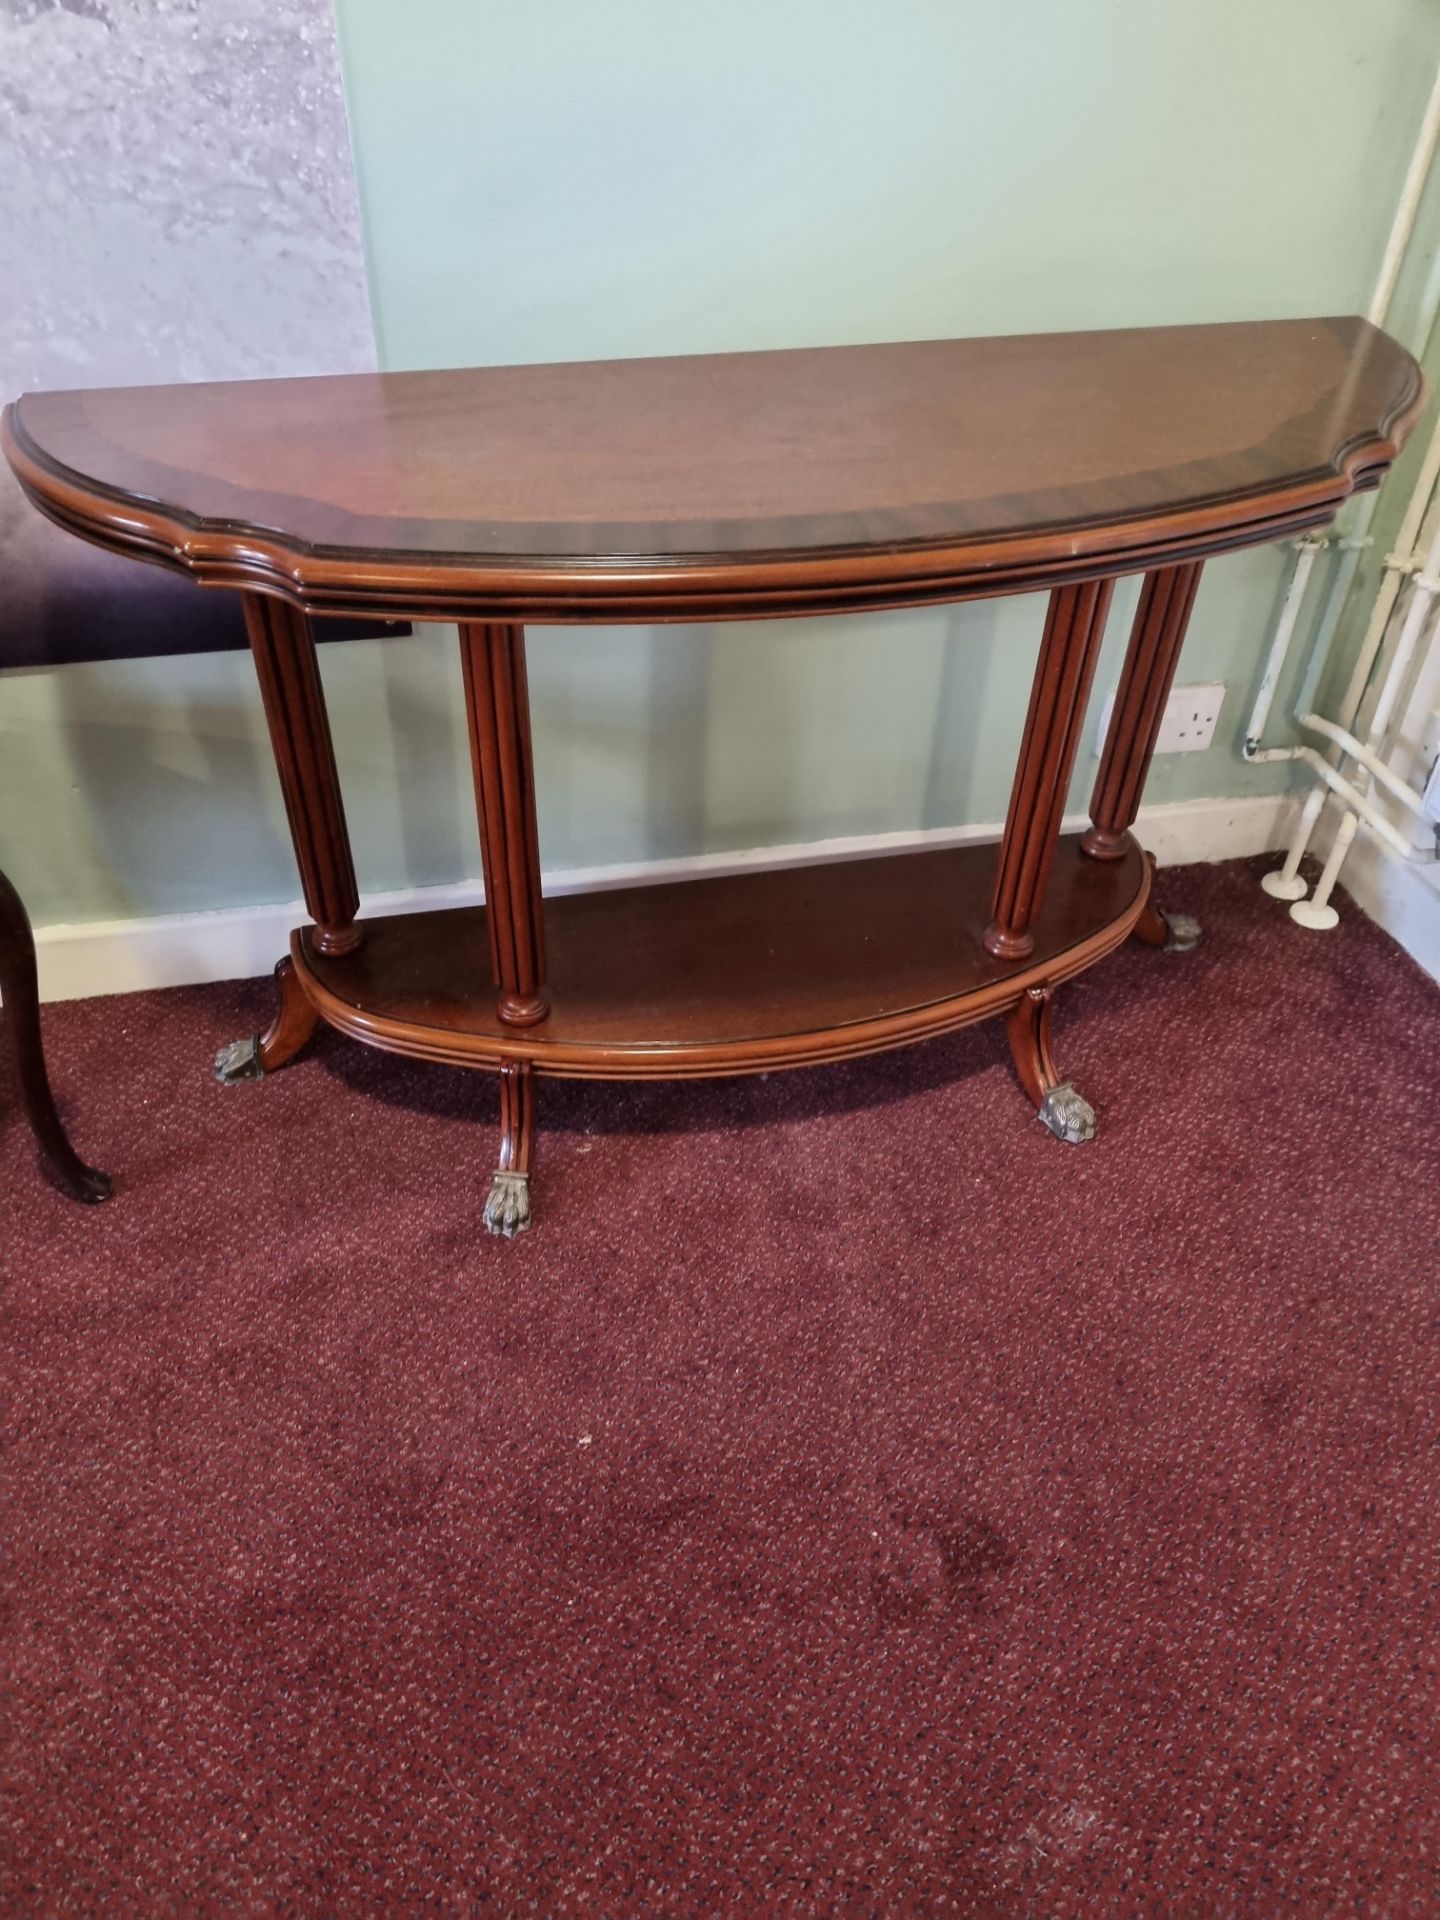 Theseira Distinctive Quality Exquisite Design Mahogany Two Tier Demi Lume With Carved Legs And